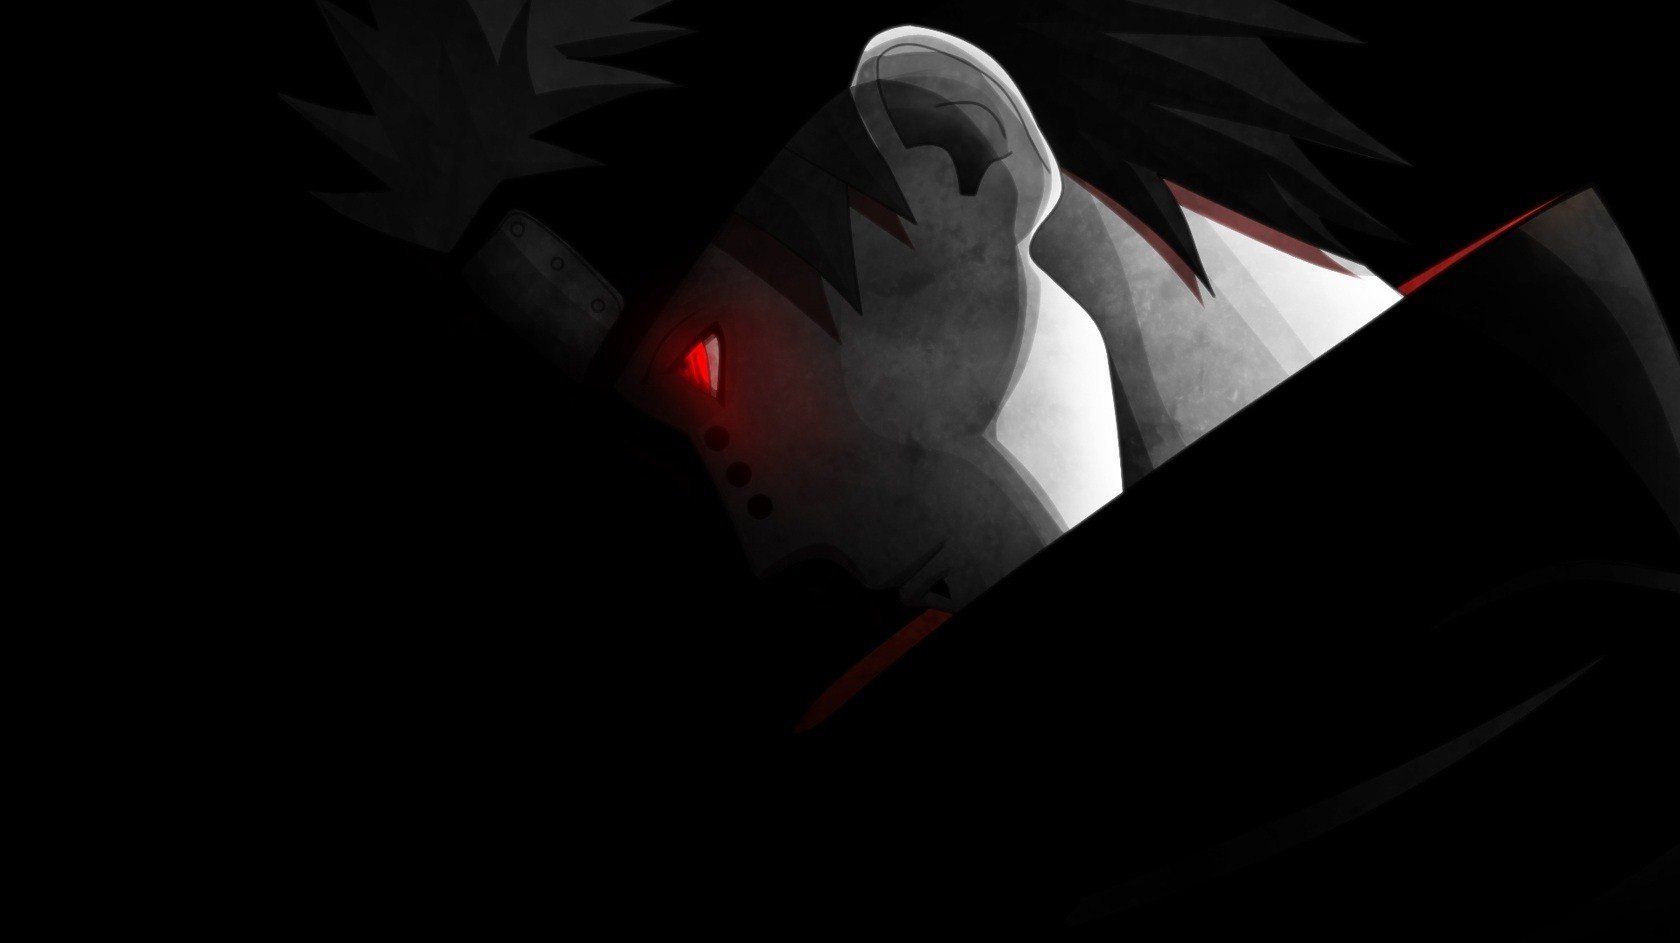 Dark Red Anime Wallpapers